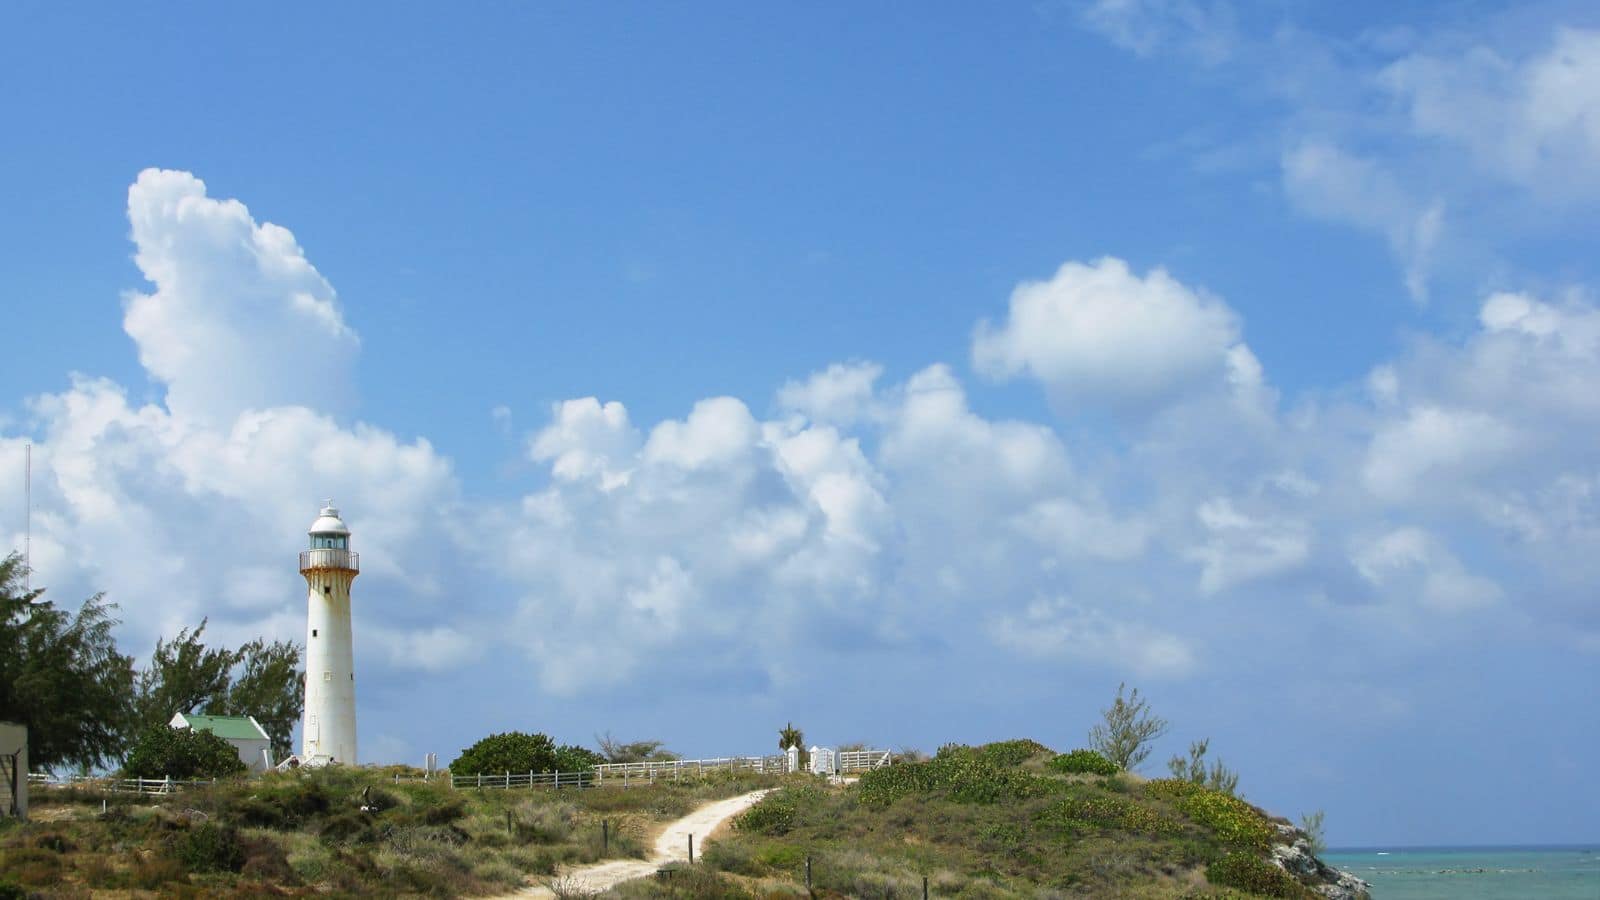 15.) See the Grand Turk Lighthouse